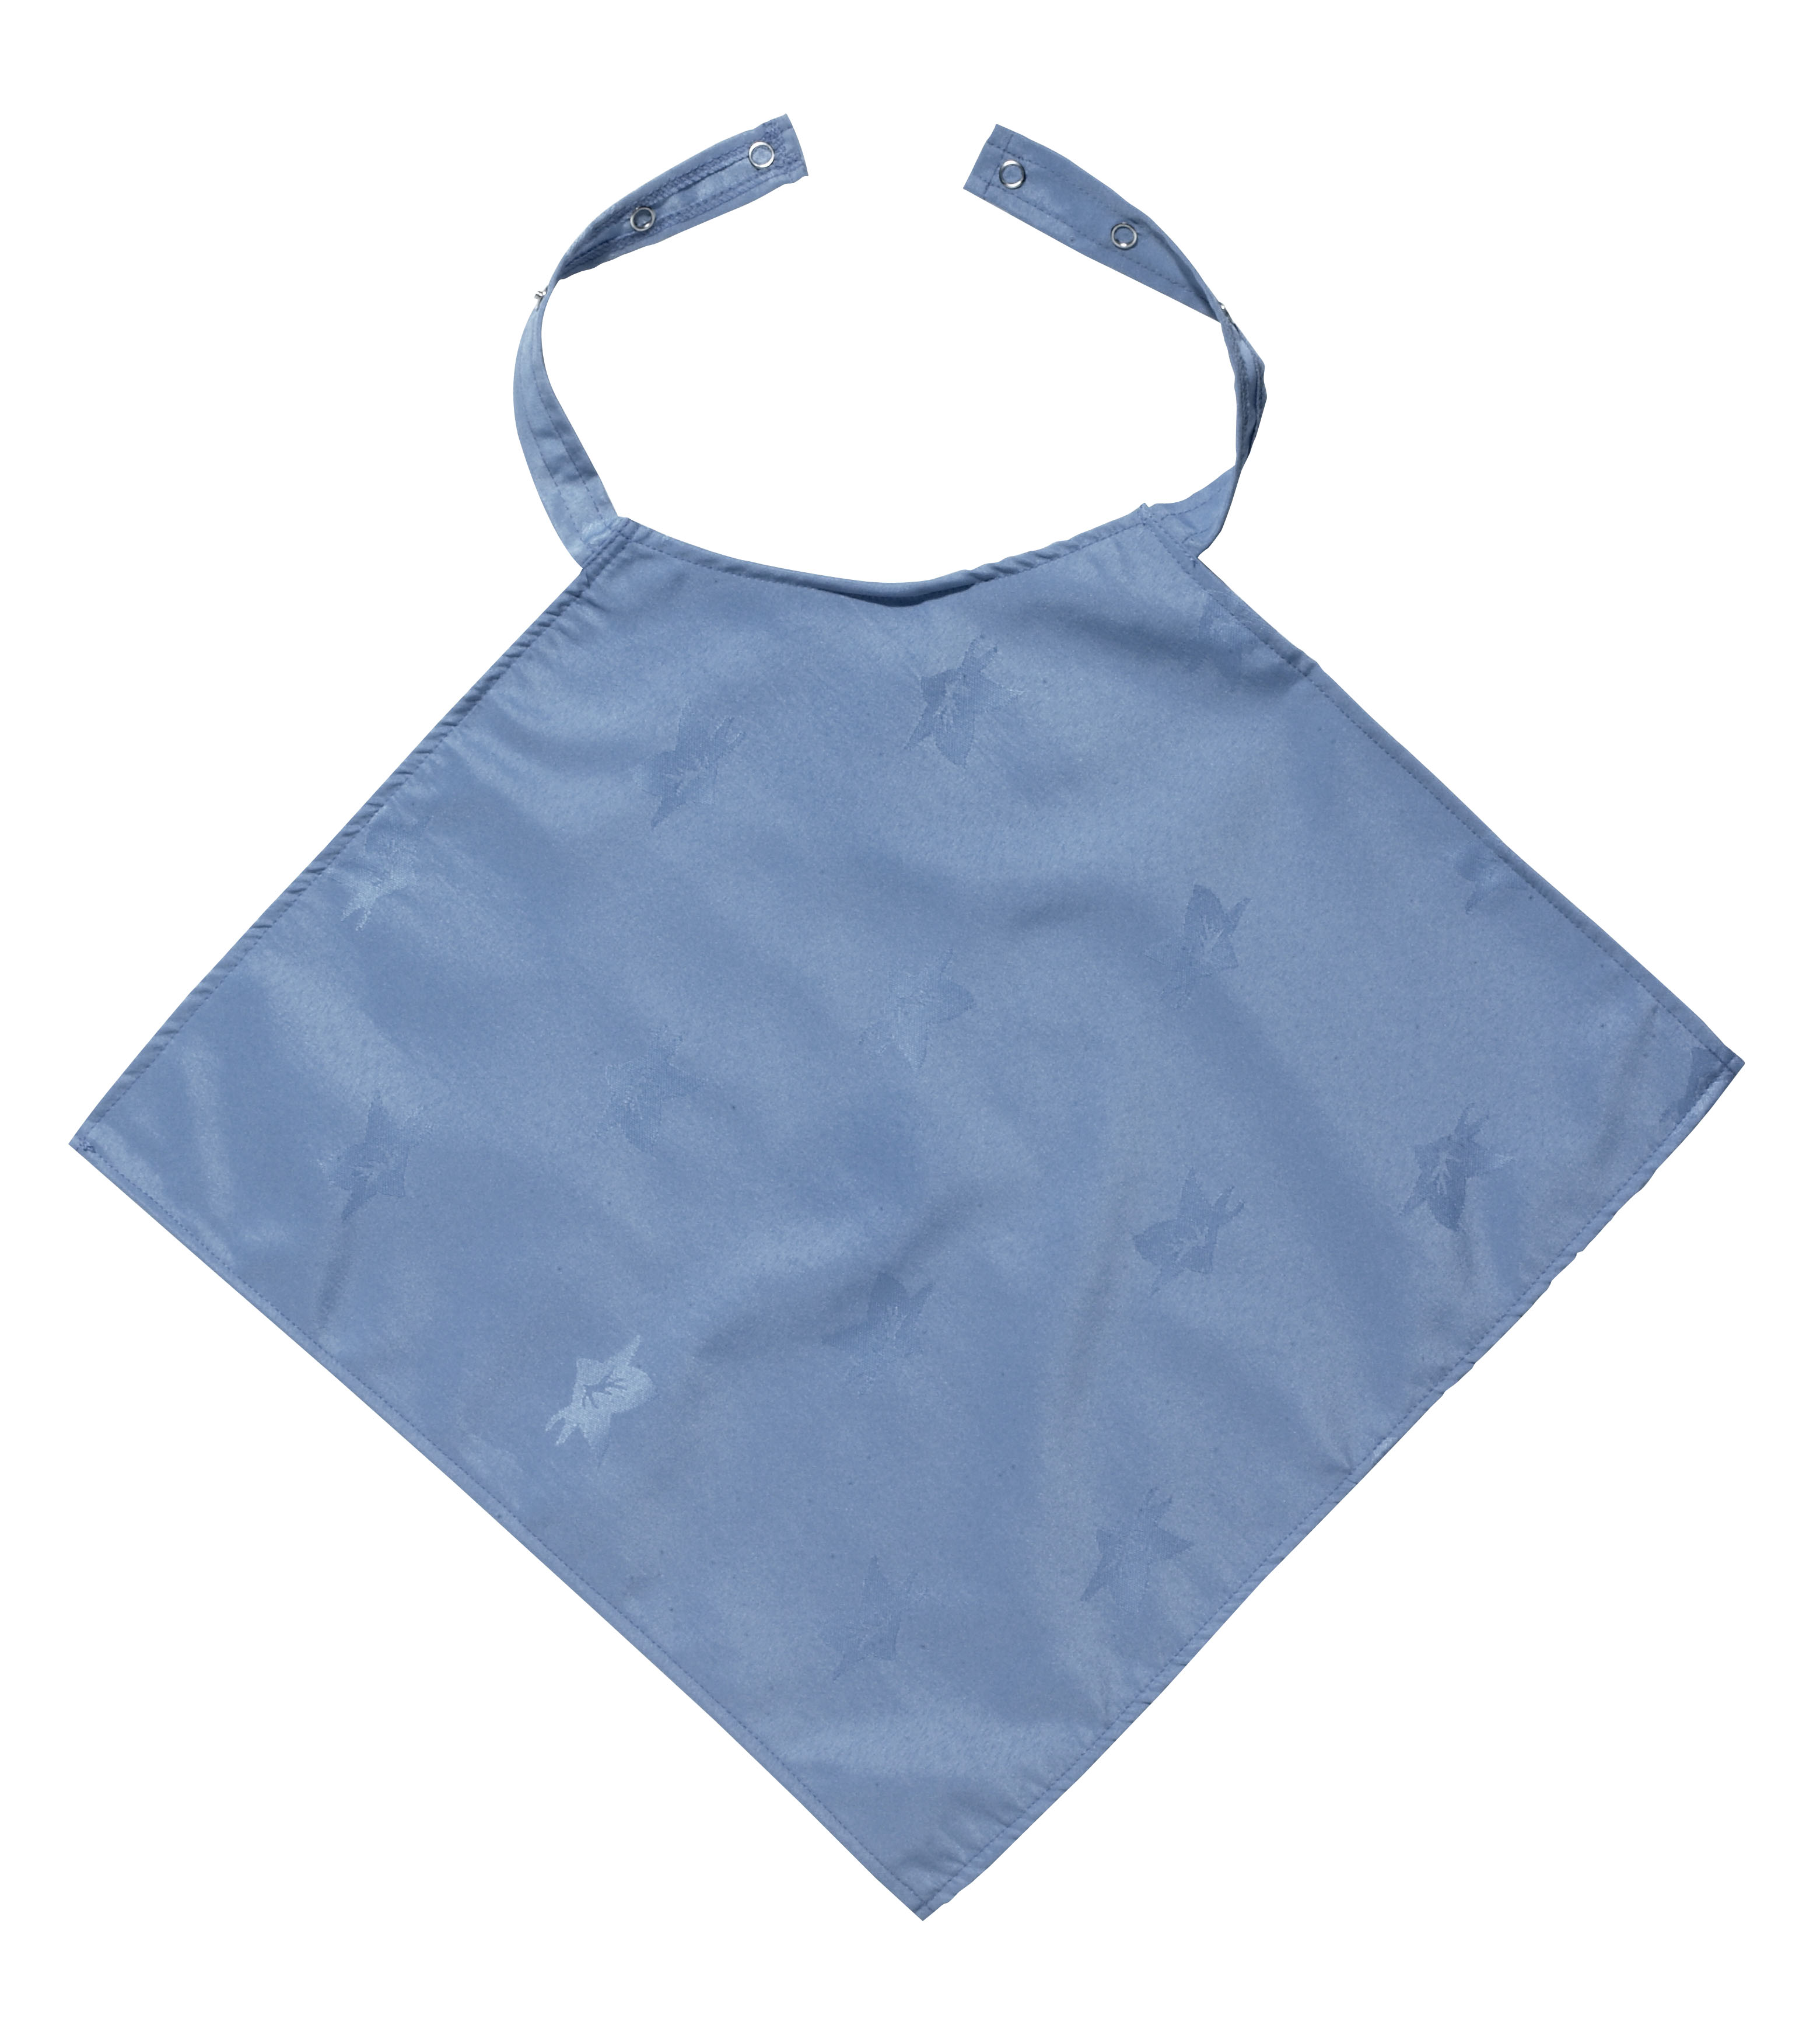 Napkin Style Dignified Clothing Protectors - Blue